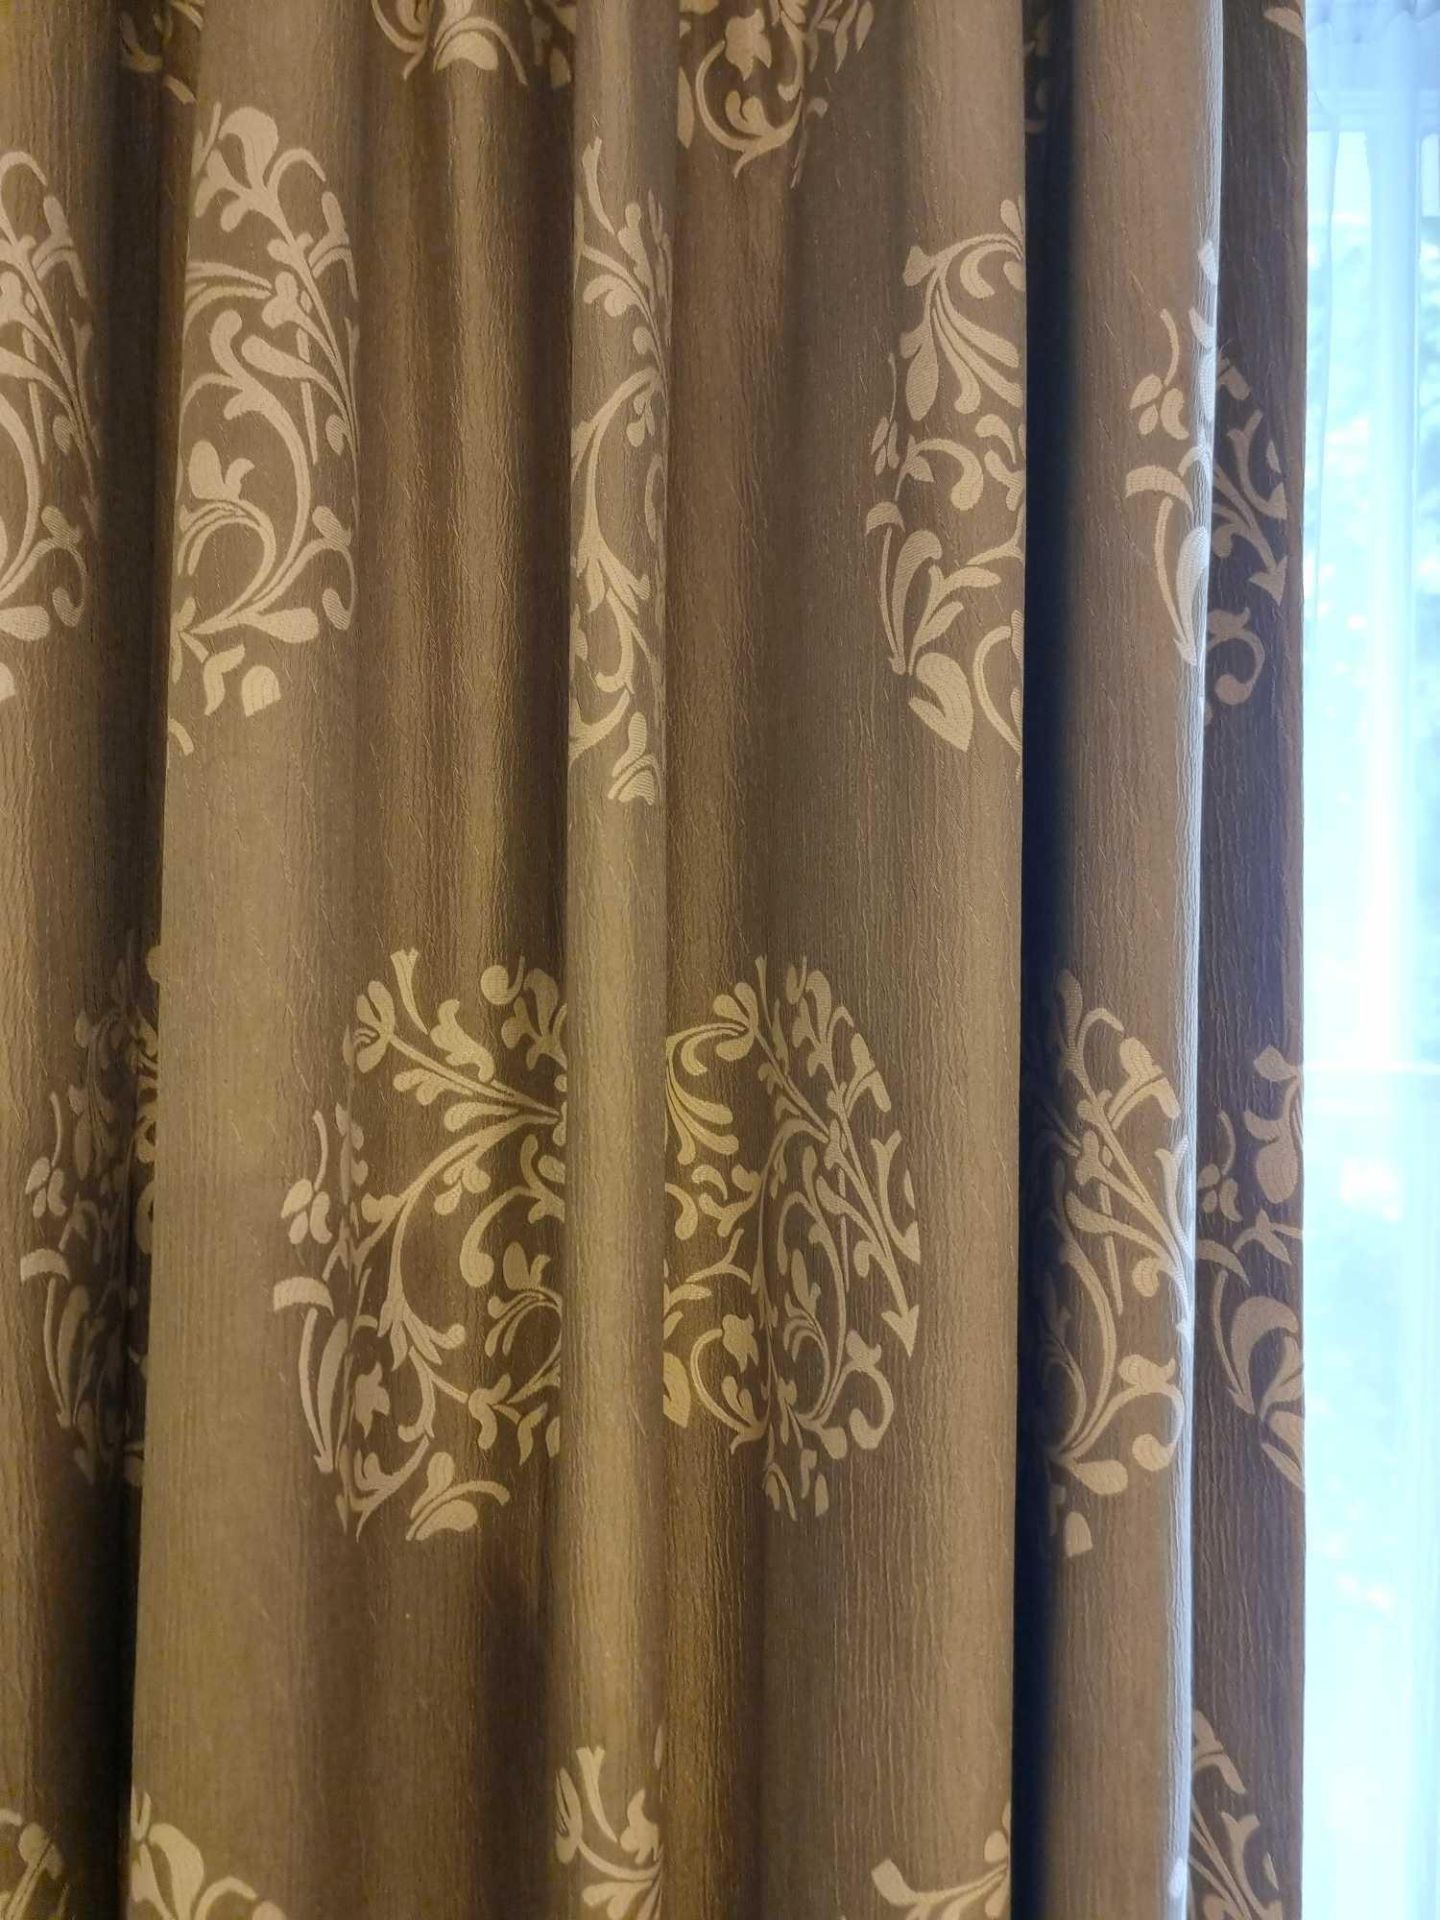 A Pair Of Lined Drapes Green And Gold Pattern On Curtain Track Span 140 X 210cm (Room 33) - Image 2 of 2